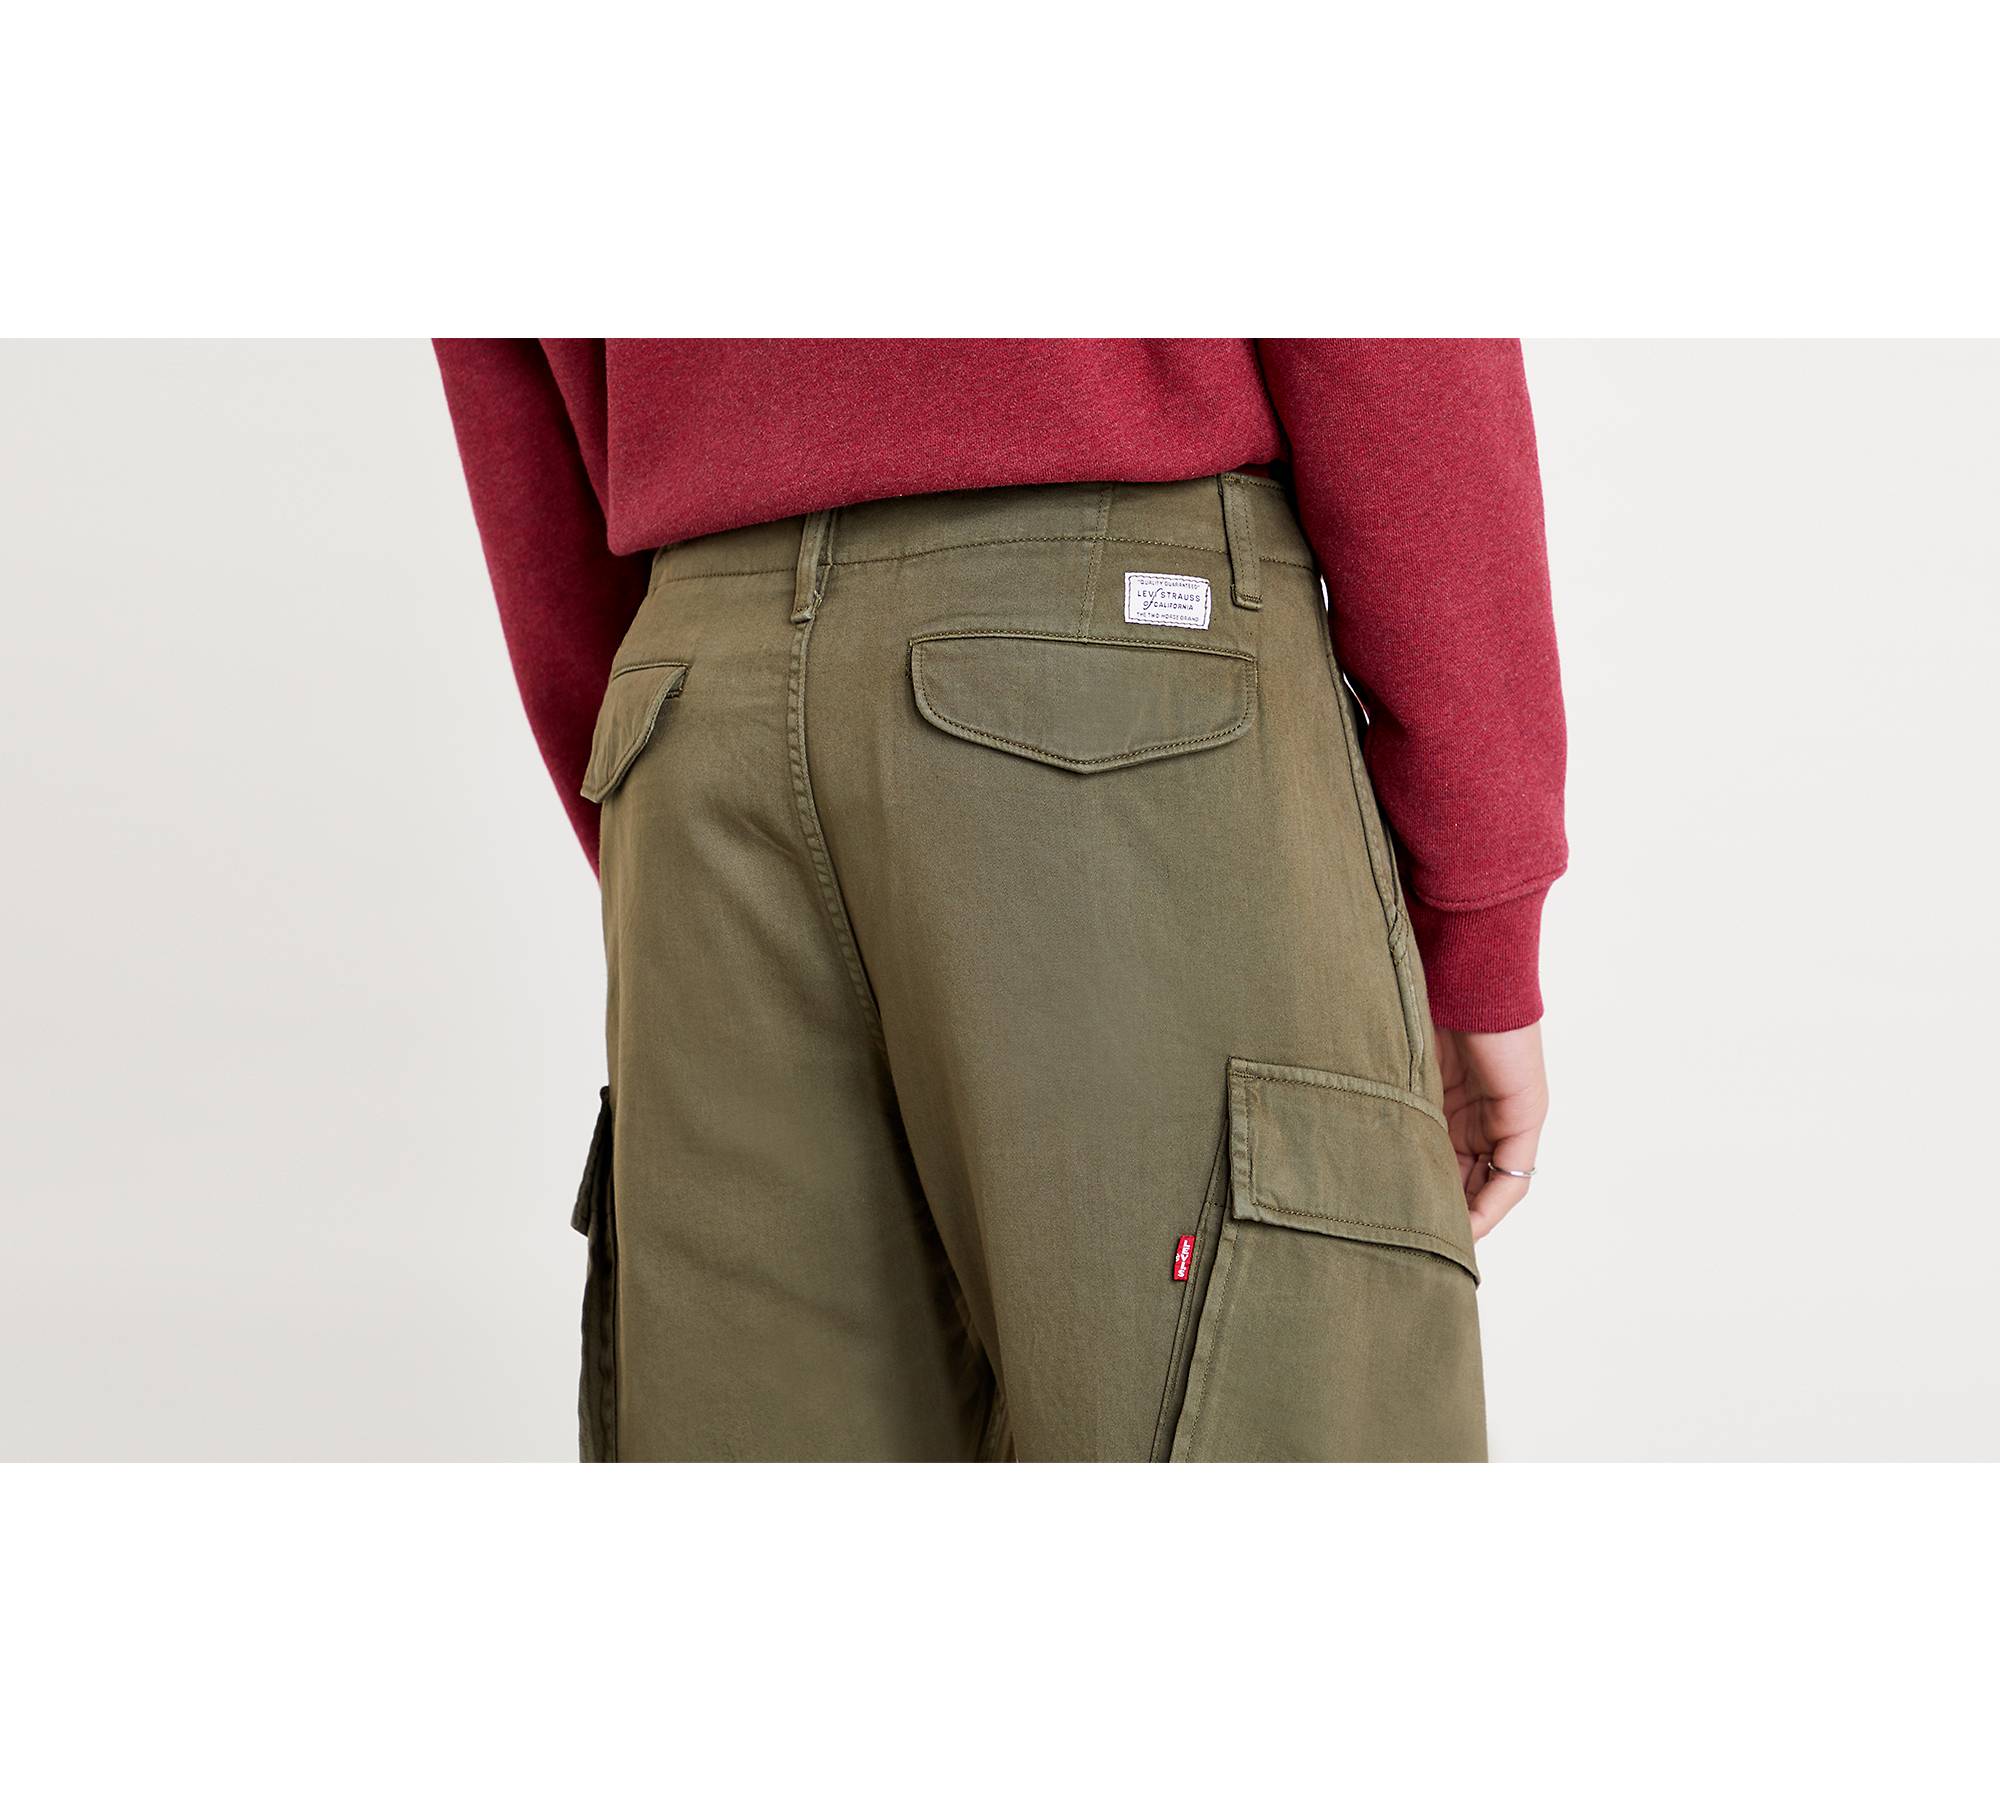 LEVIS BANDED CARRIER CARGO PANTS 574190003 OLIVE GREEN MENS SIZE 31X32